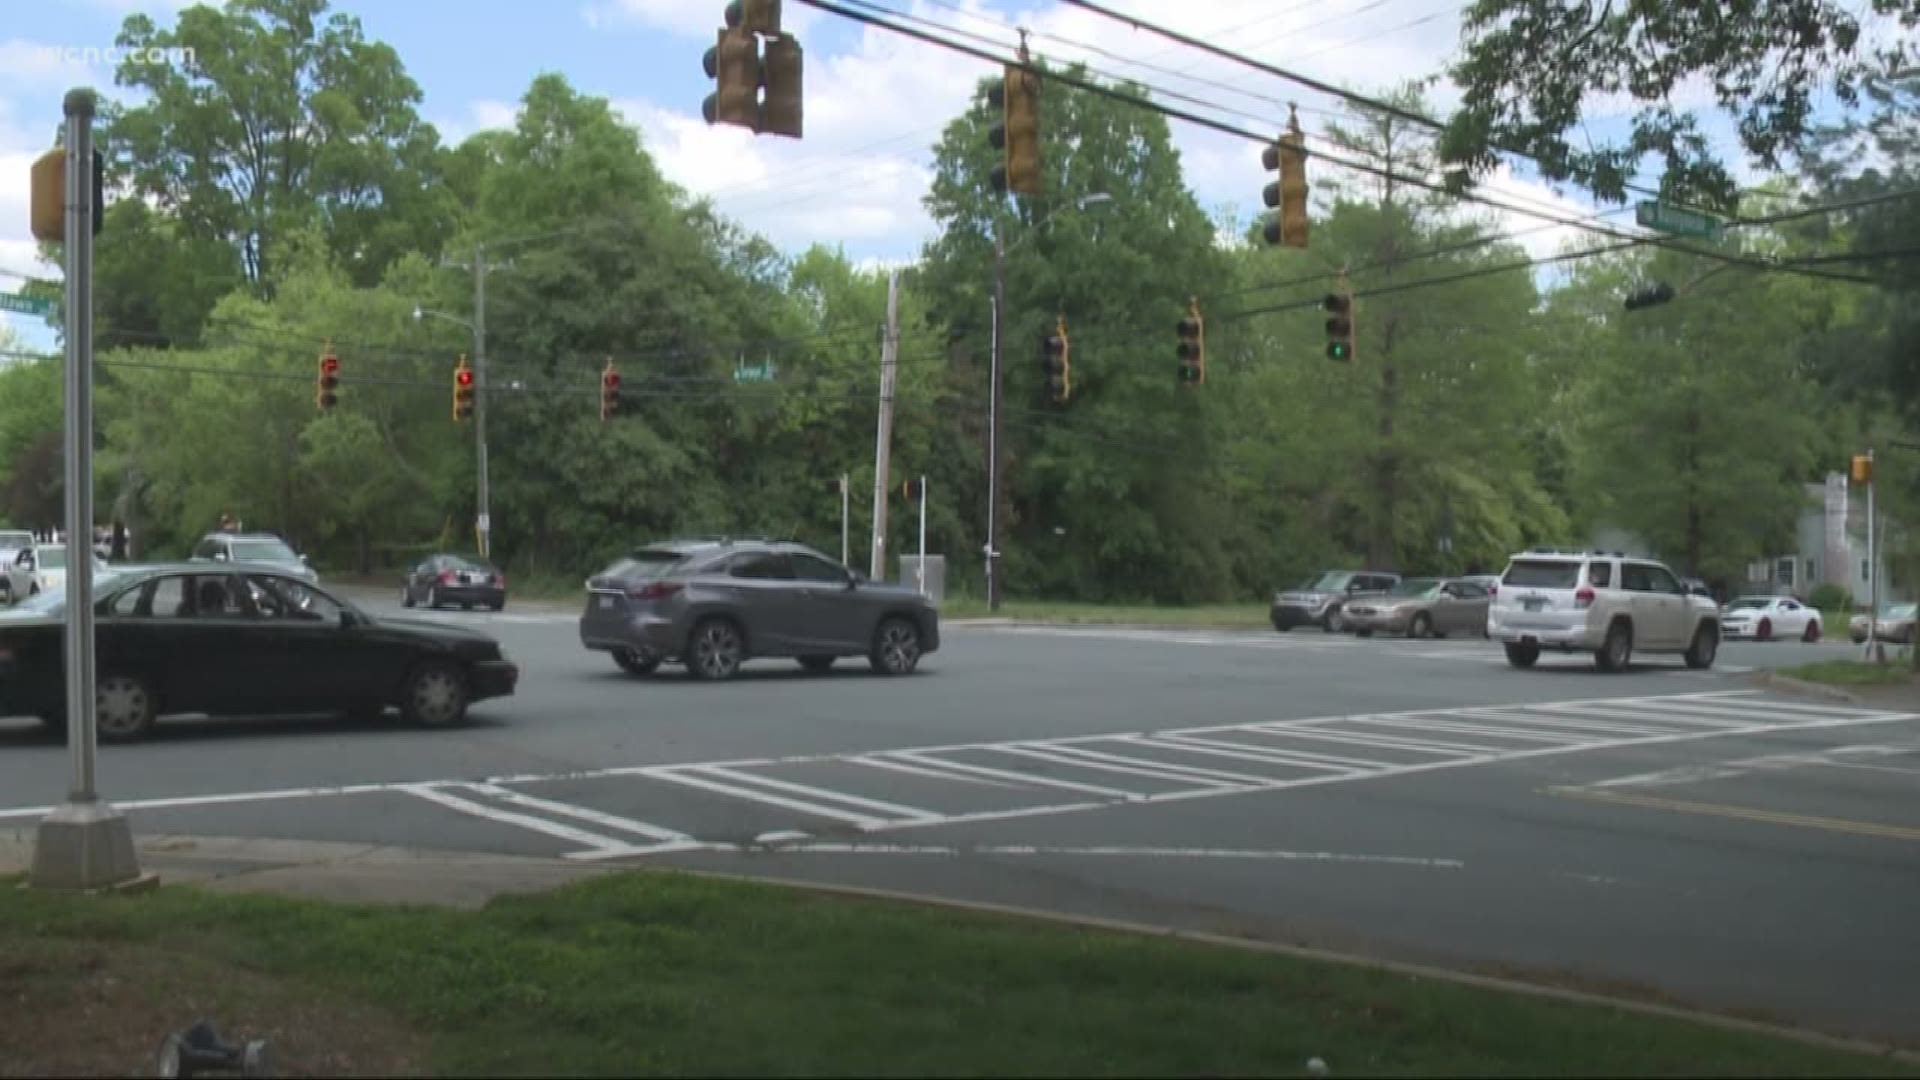 McCrory says he was slowing down to stop at this intersection of Selwyn and Runnymeade Lane for a pedestrian when a man recognized him, and smash his car with a large stick.